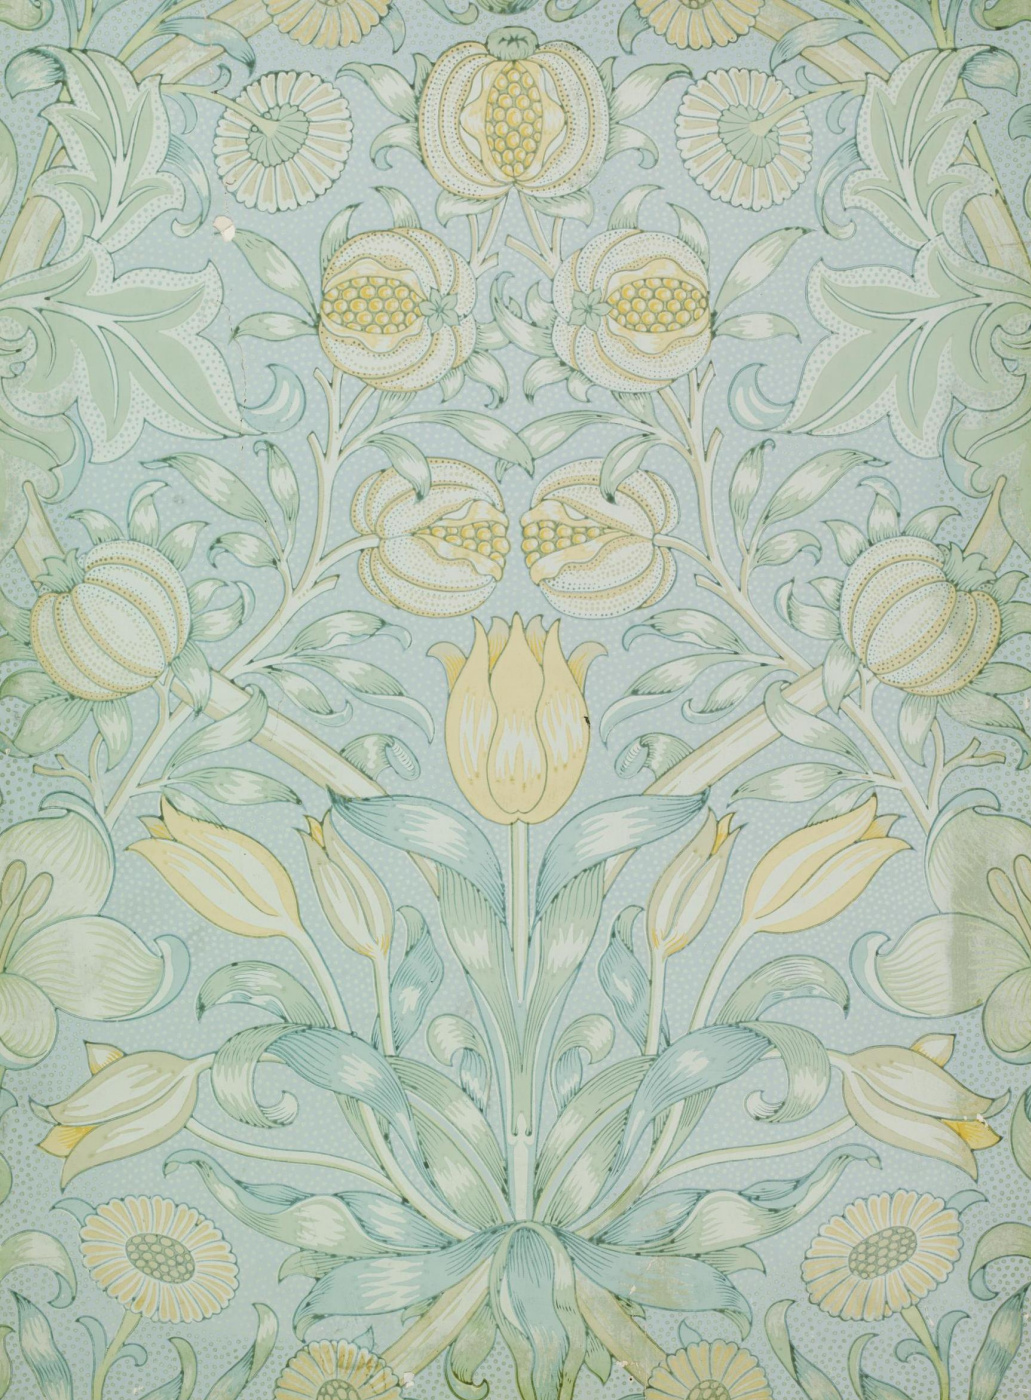 William Morris. Lily and garnet